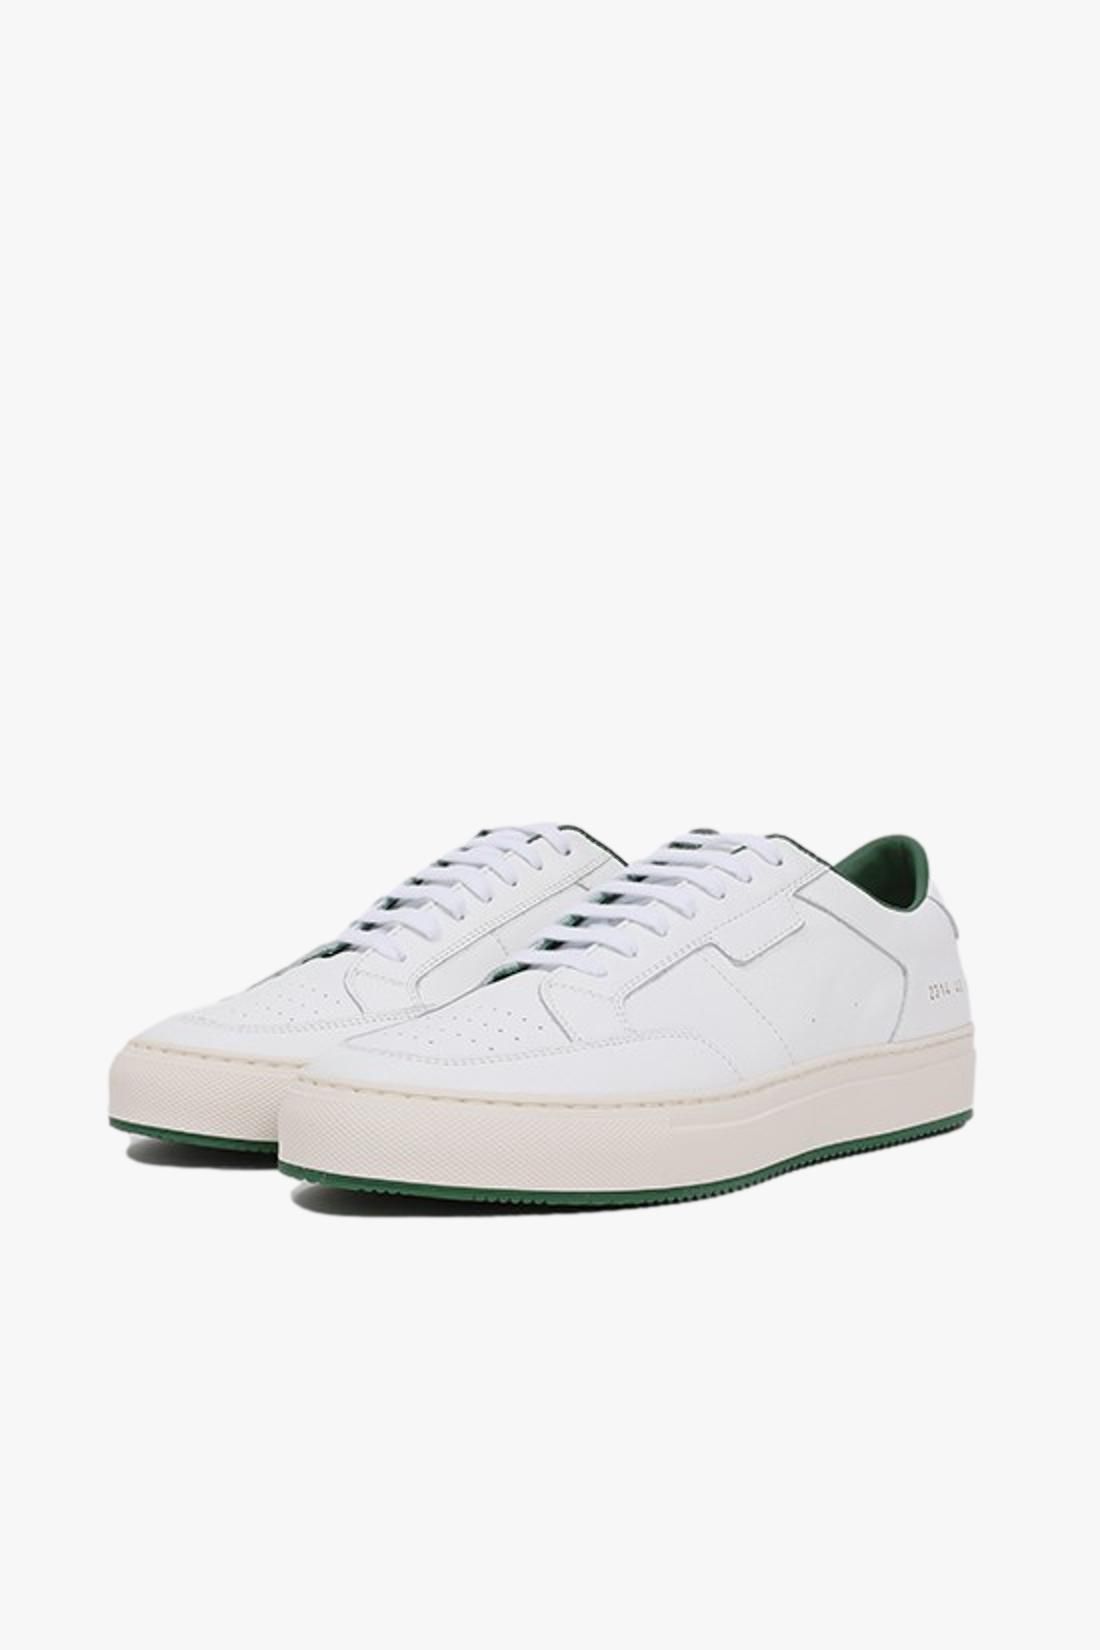 COMMON PROJECTS / Tennis 2314 White/green